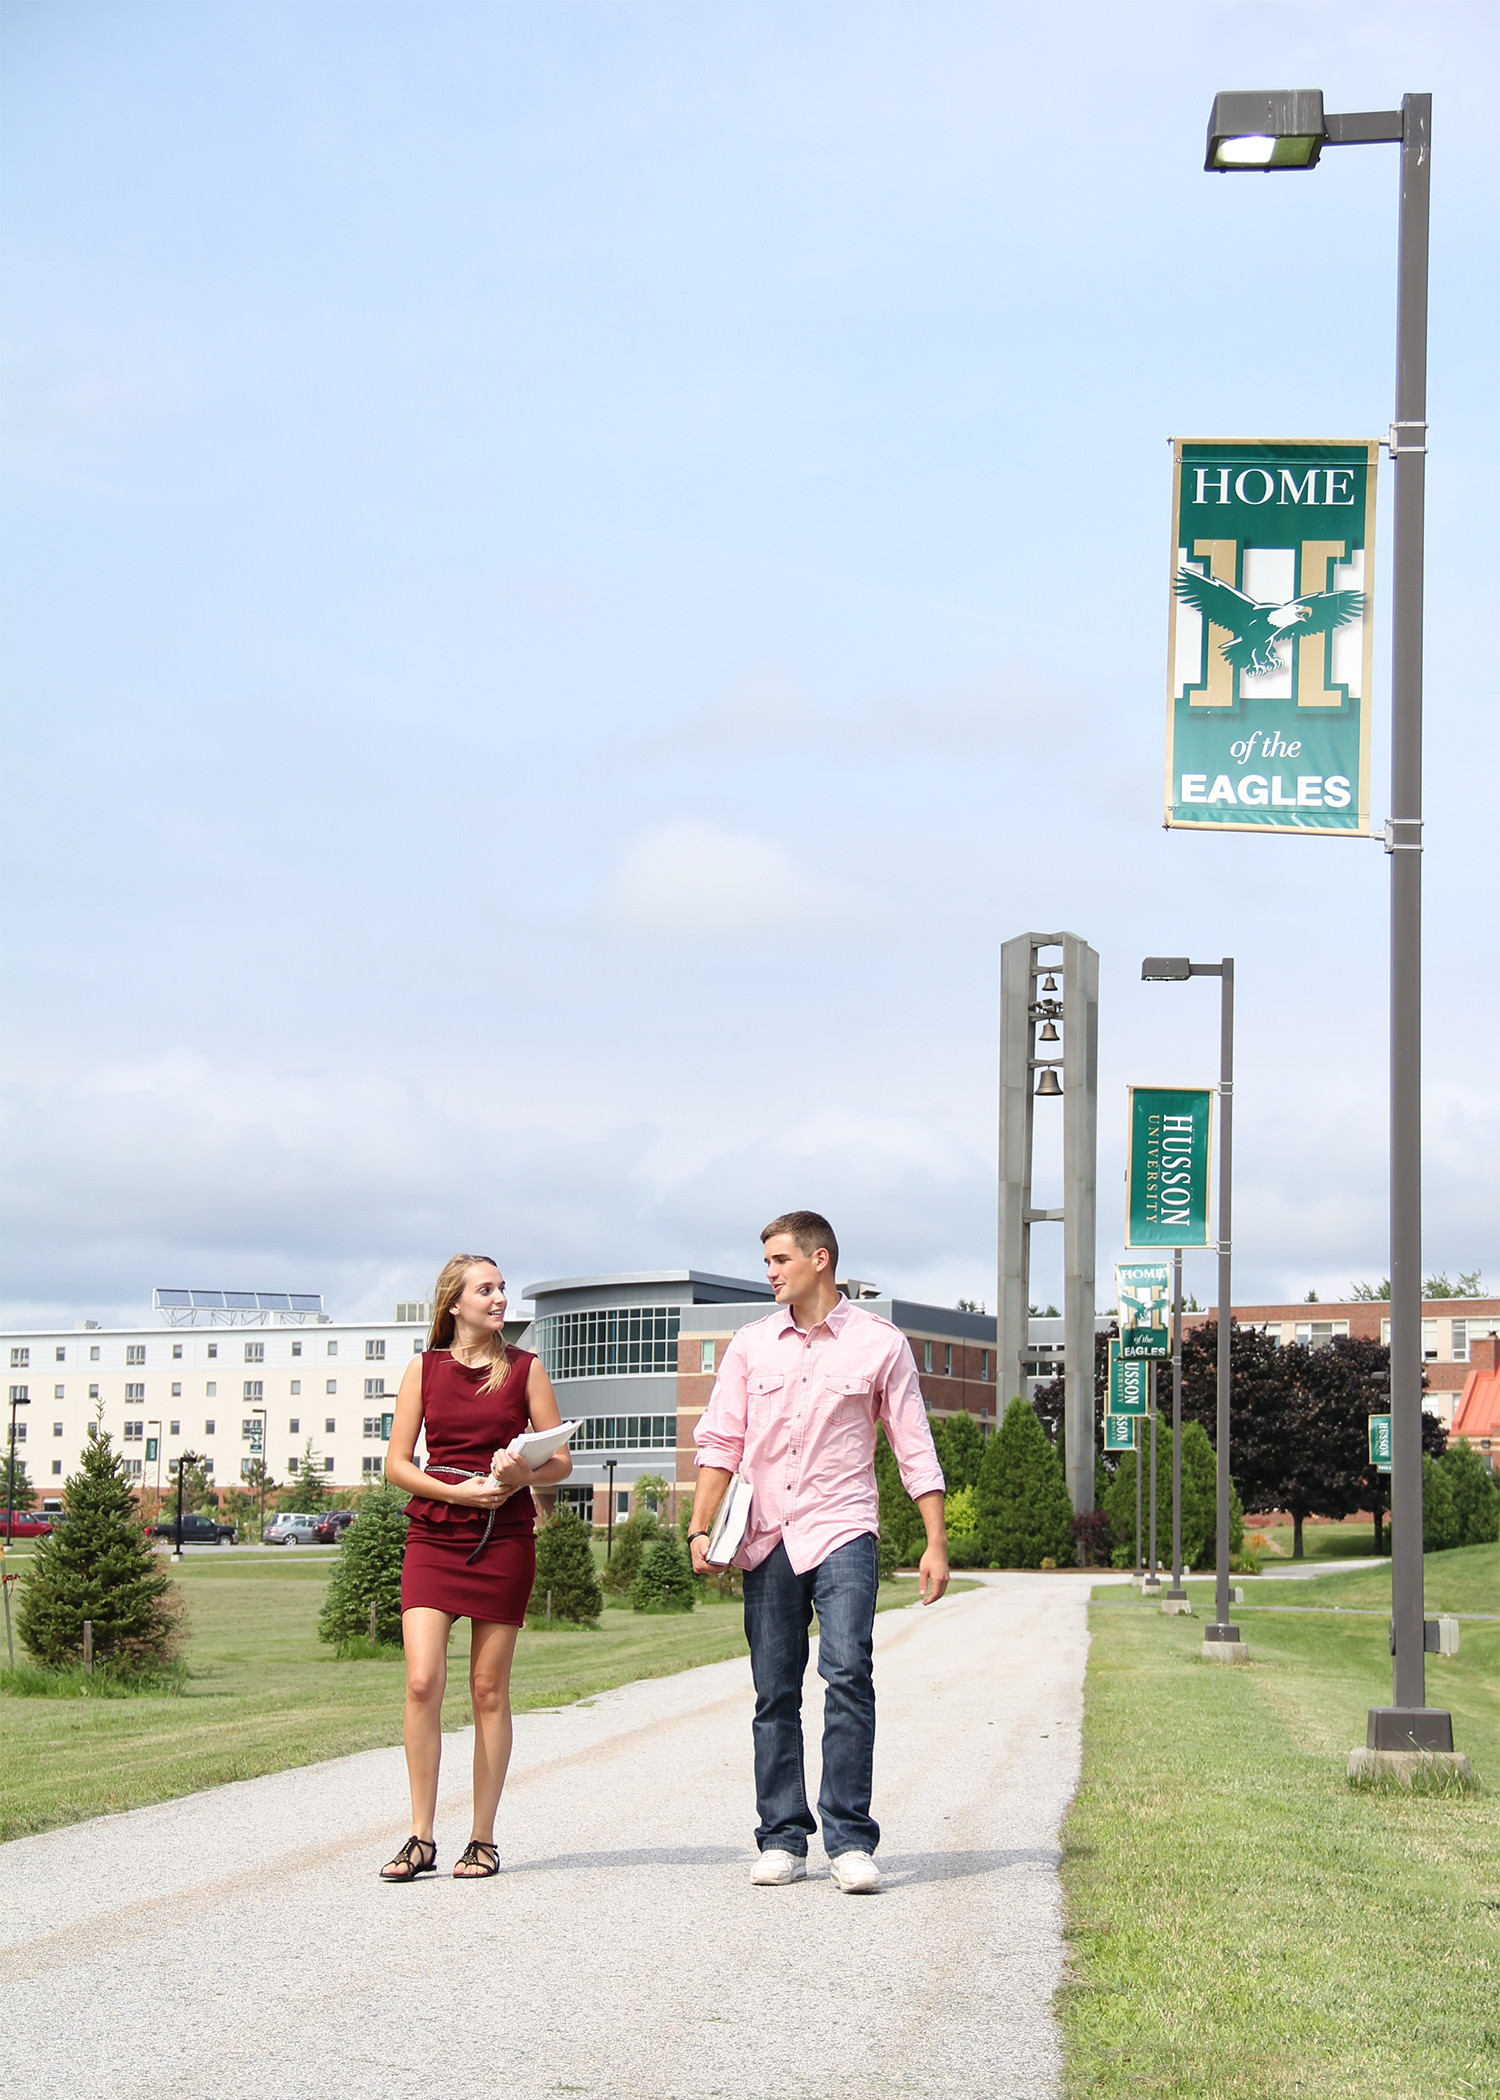 Husson University is located on a beautiful 208-acre campus in Bangor, Maine.